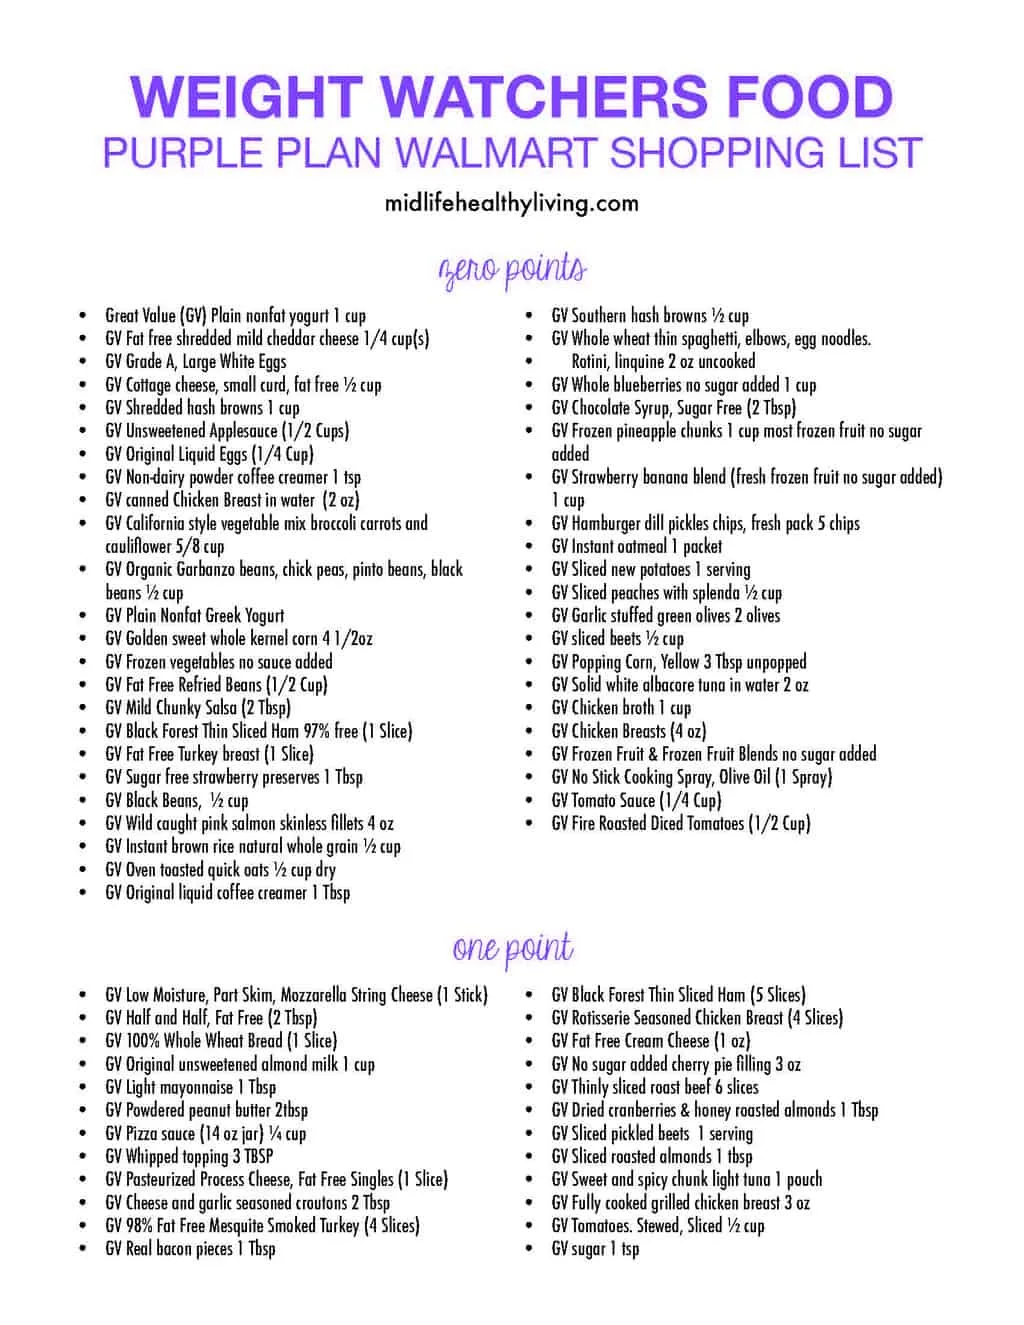 Choosing foods to buy from Walmart for Weight Watchers Purple Plan just got a whole lot easier. This WW Purple Walmart Groceries post is what you need. The list is broken down by point values, of Great Value foods you can buy at Walmart for WW Freestyle Purple Plan. 